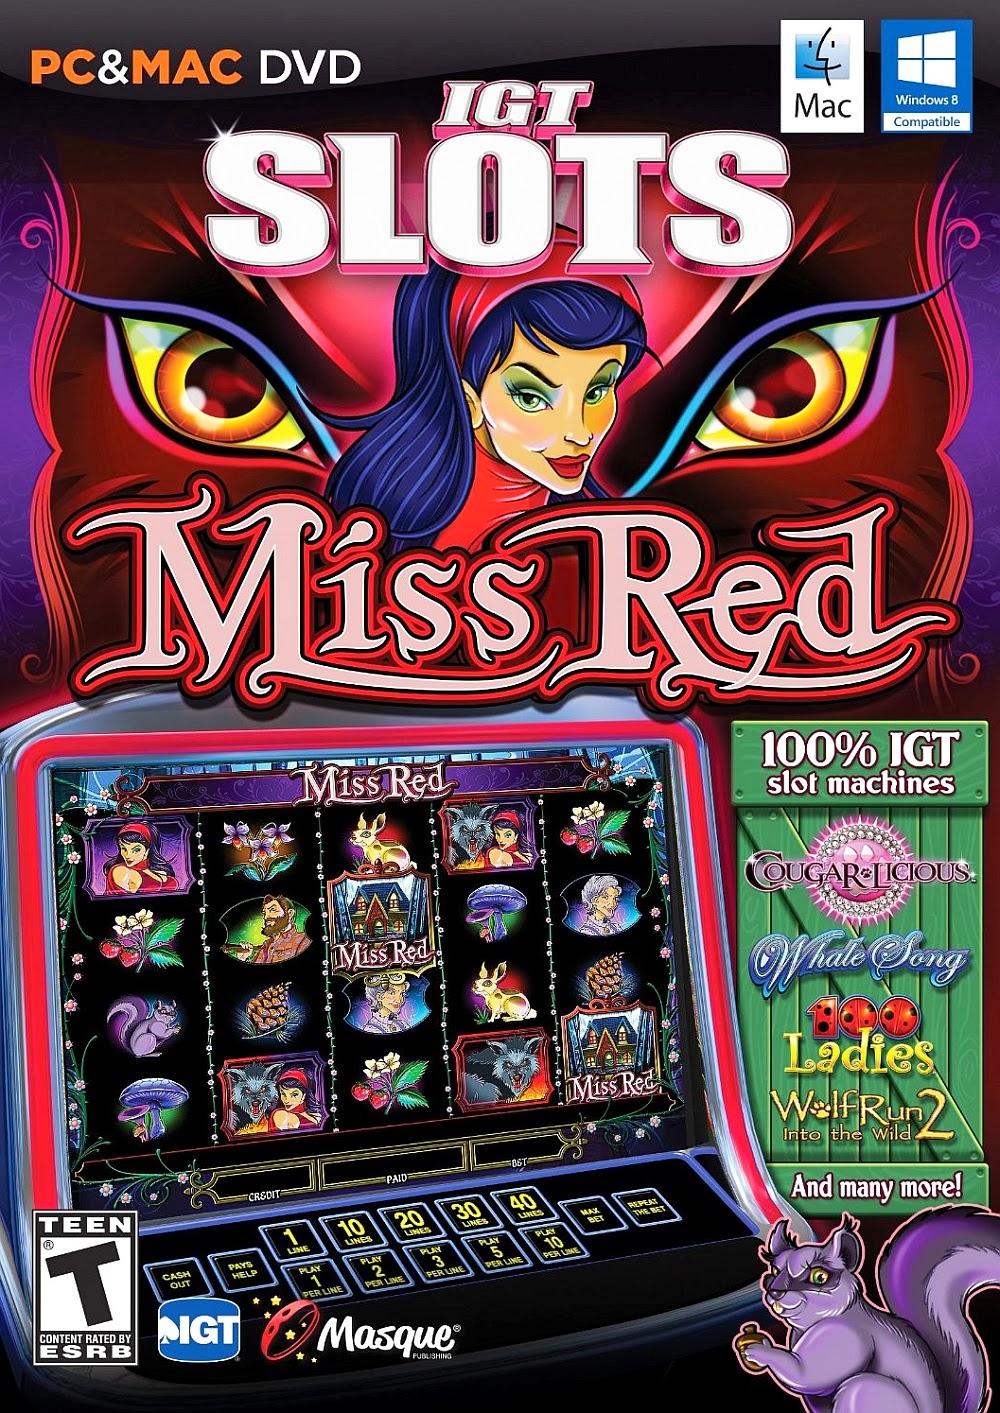 Download Free Slot Machine Game For Pc